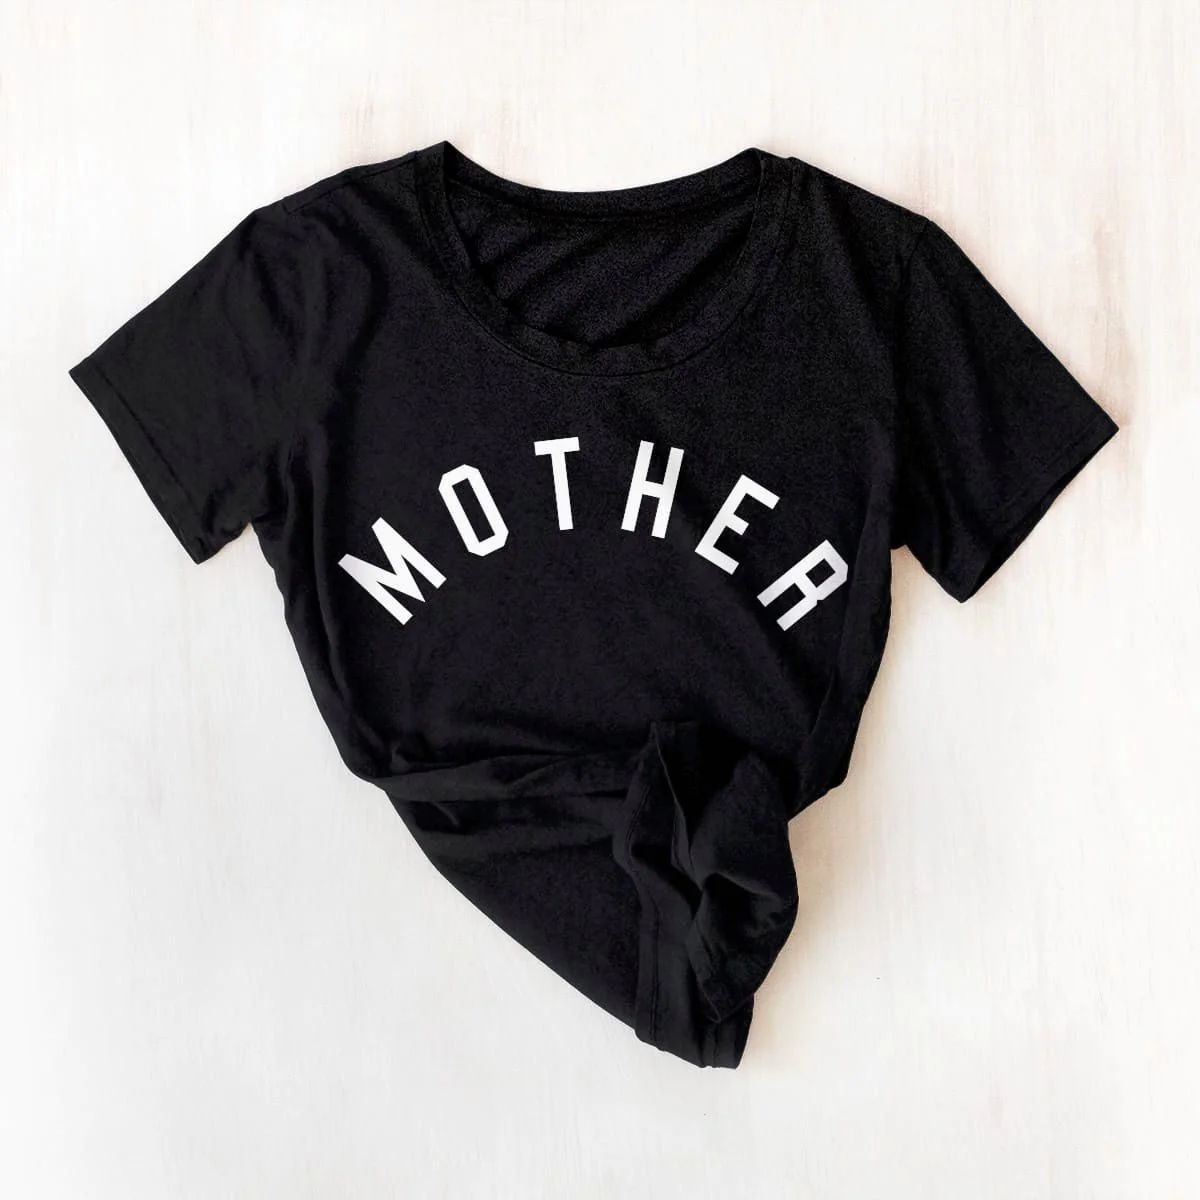 Mother Tee in Black, Mother T shirt in Black - Ford And Wyatt | Ford and Wyatt